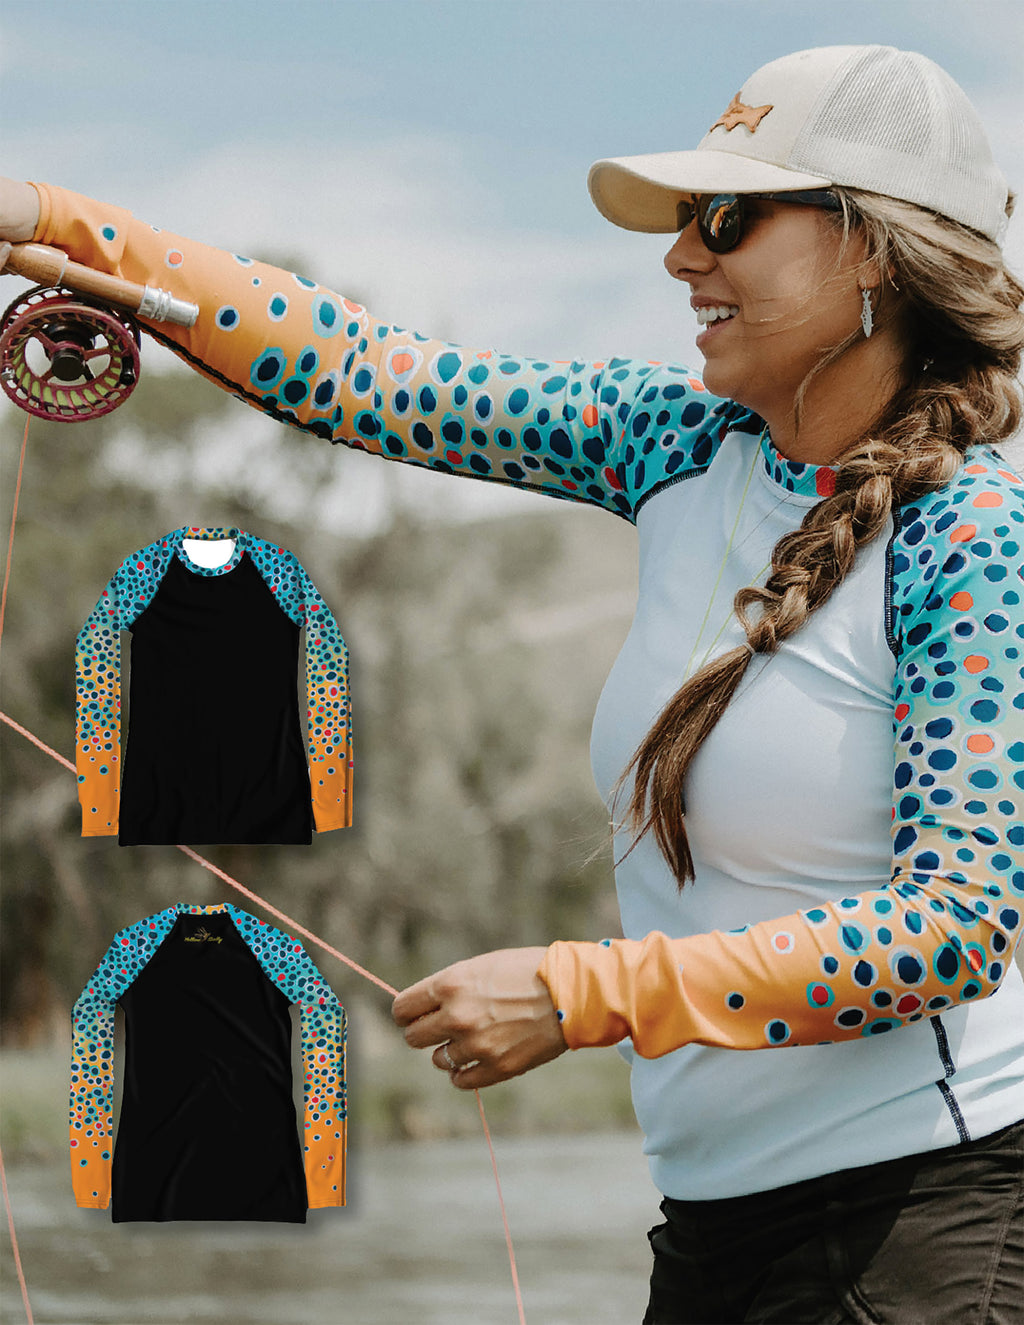 womens fly fishing clothing - Google Search  Fly fishing clothing, Trout  fishing tips, Fly fishing women